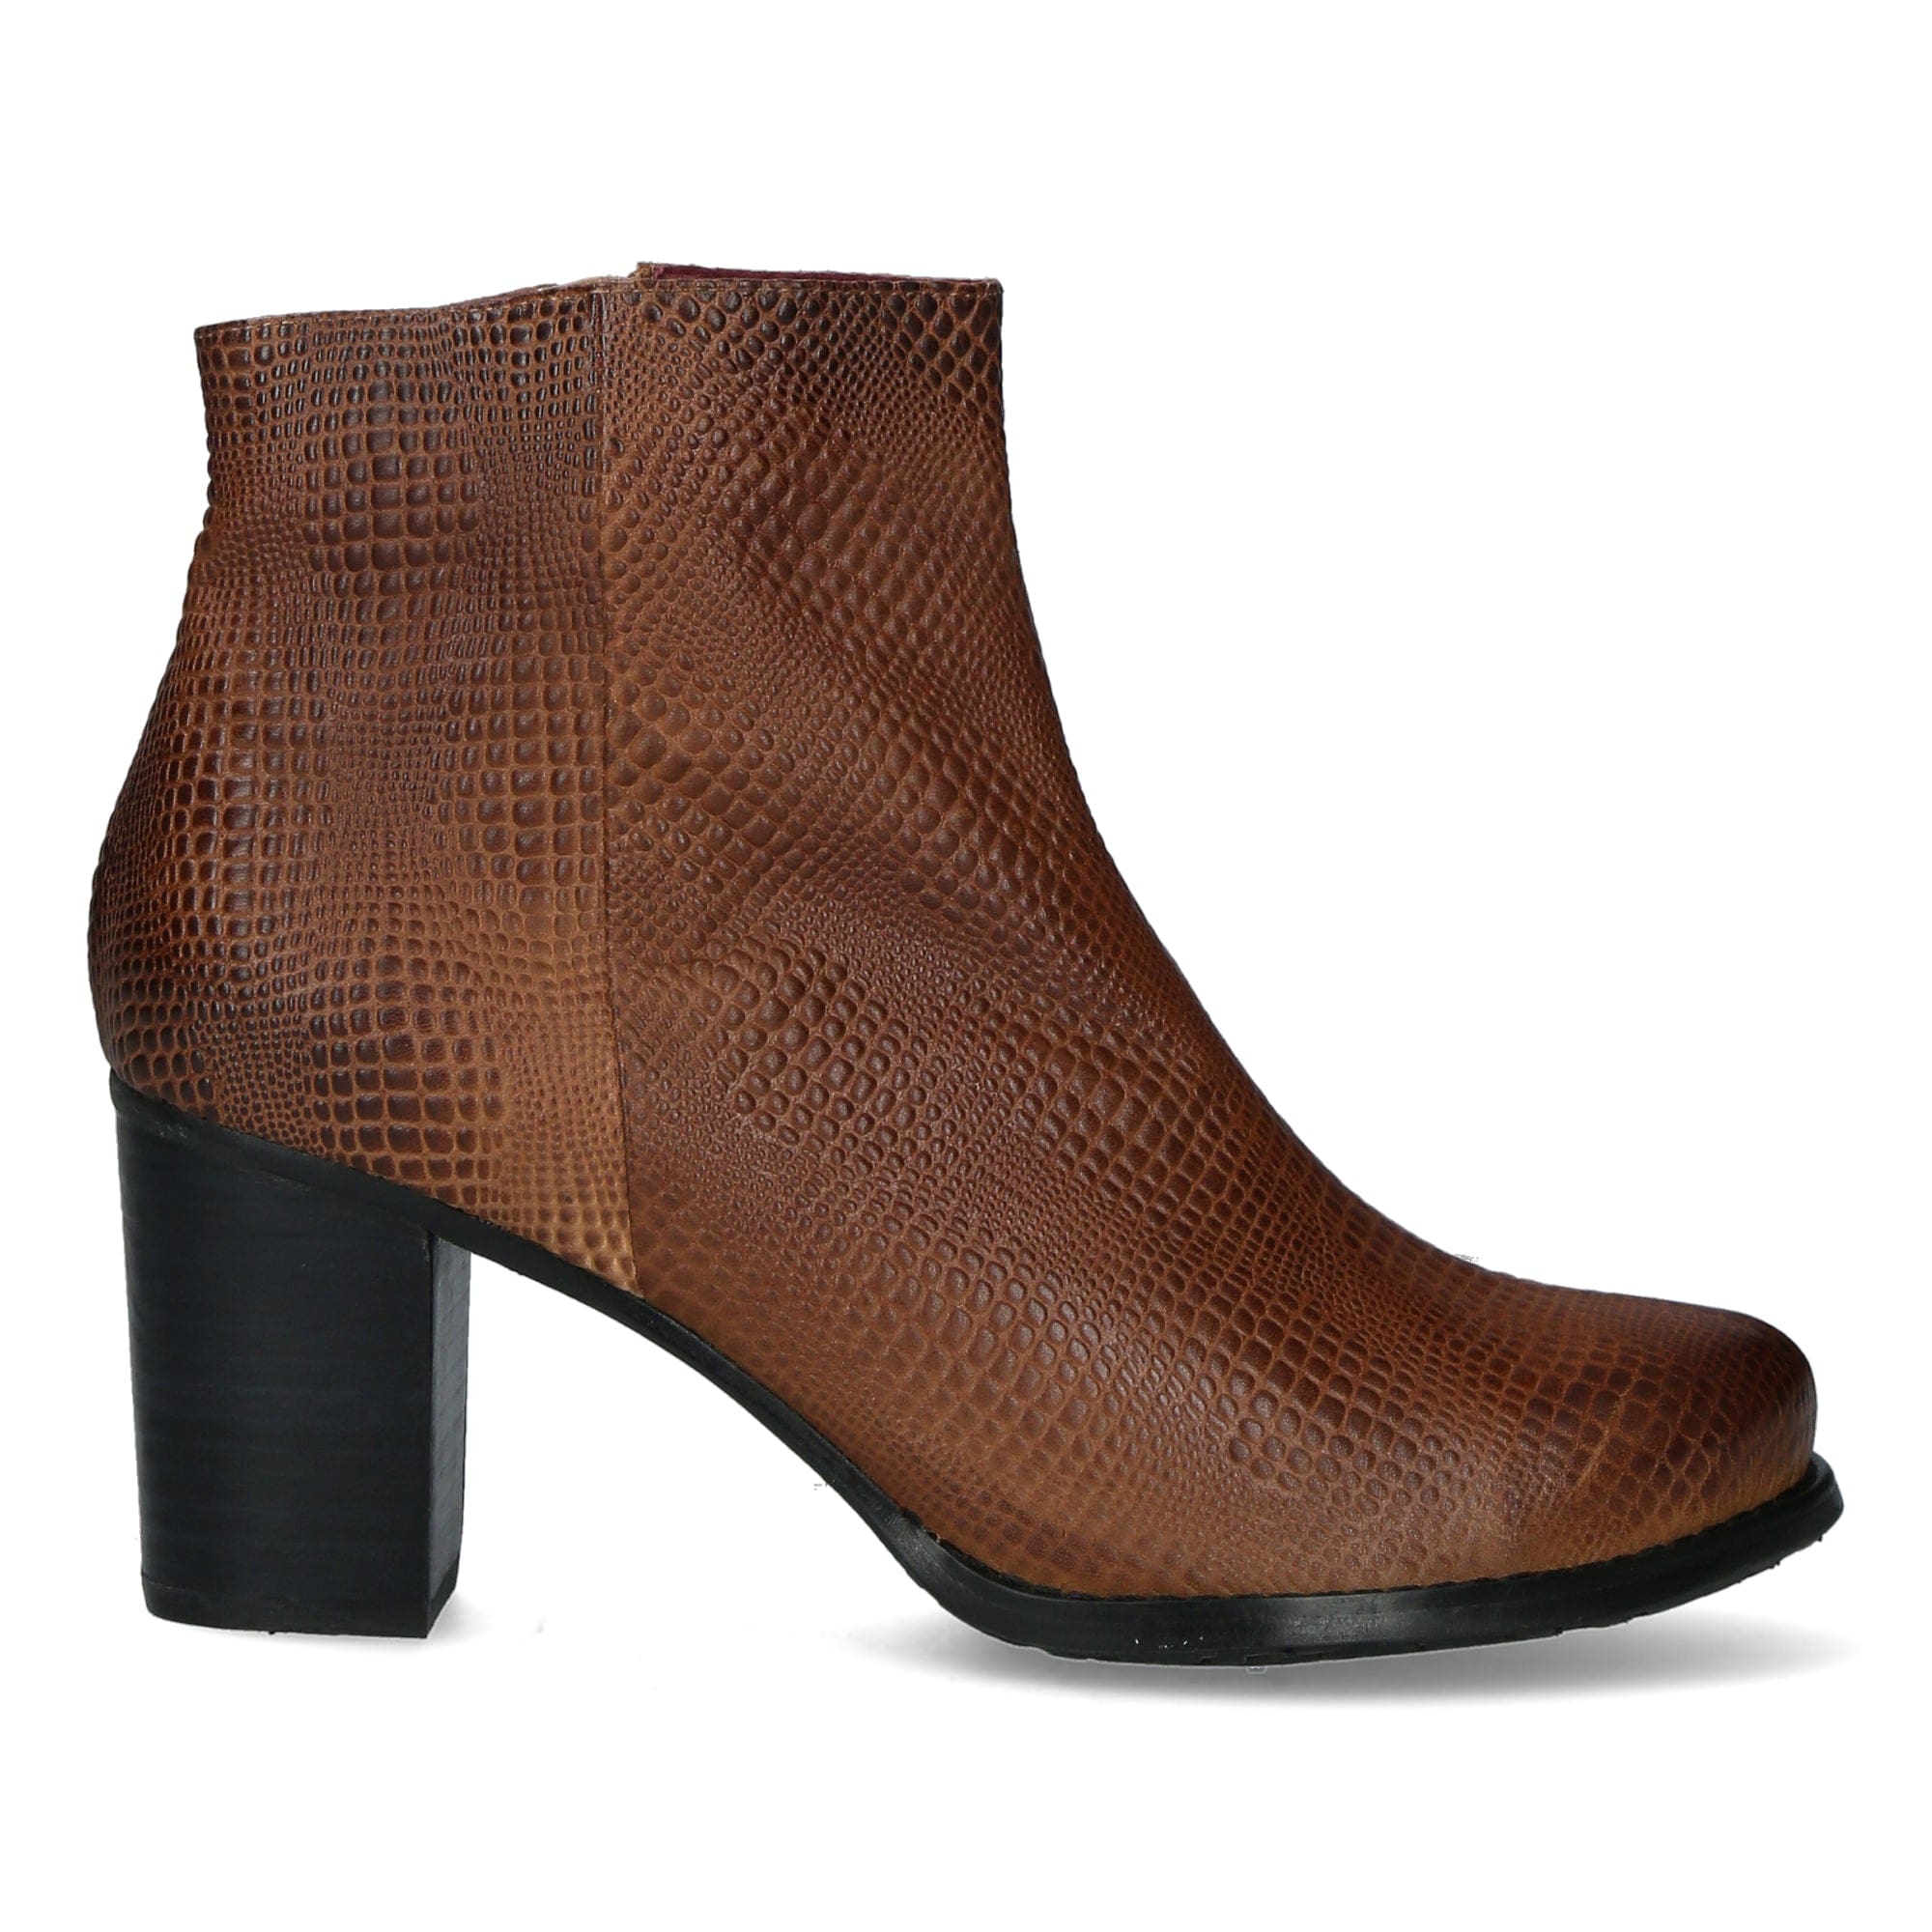 MARENA Shoes - 35 / Expresso - Boots